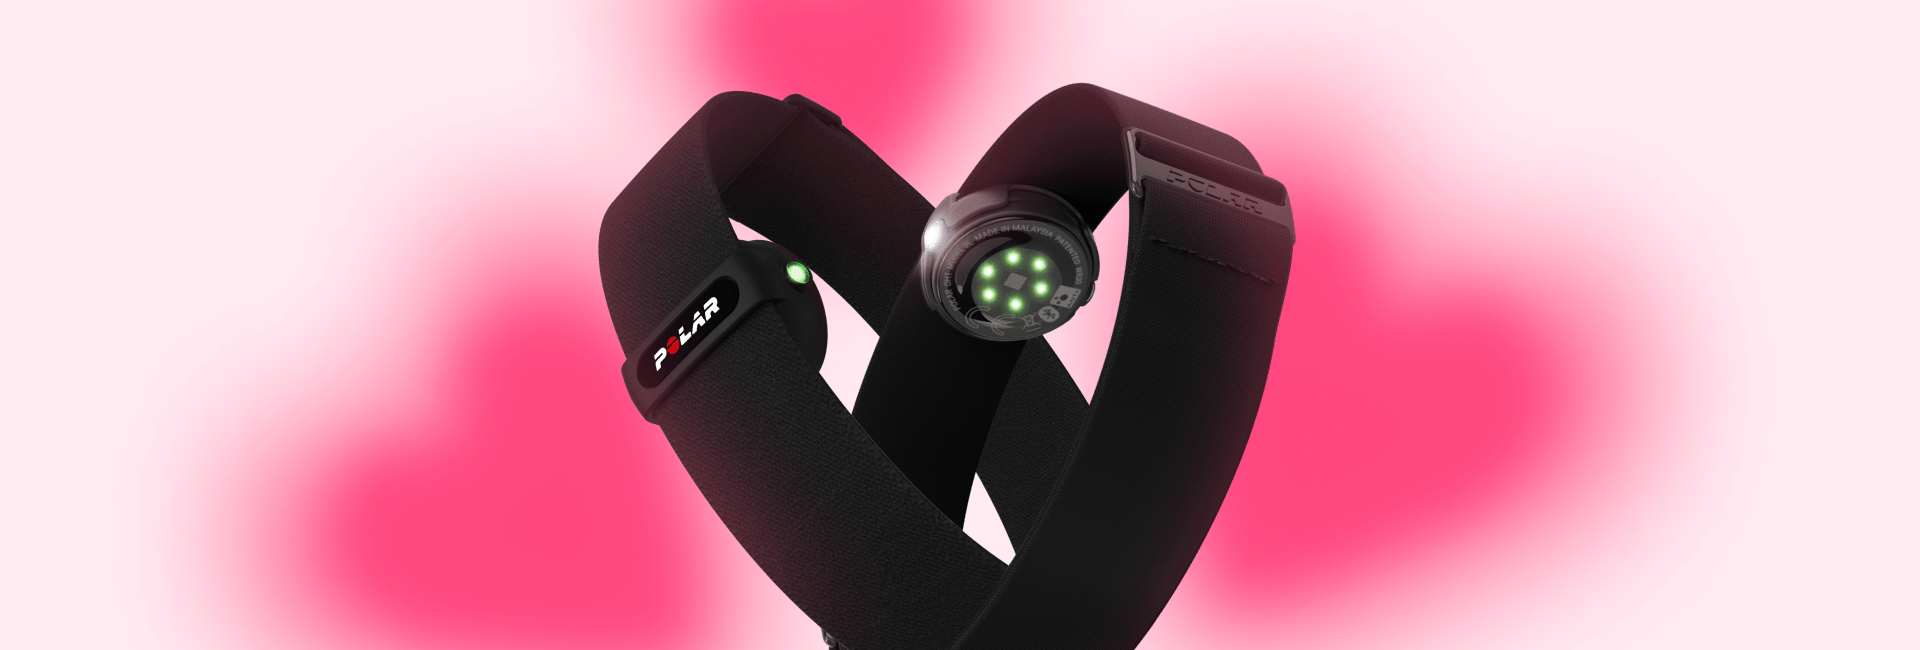 Valentine’s Day: Get a Free optical heart rate sensor